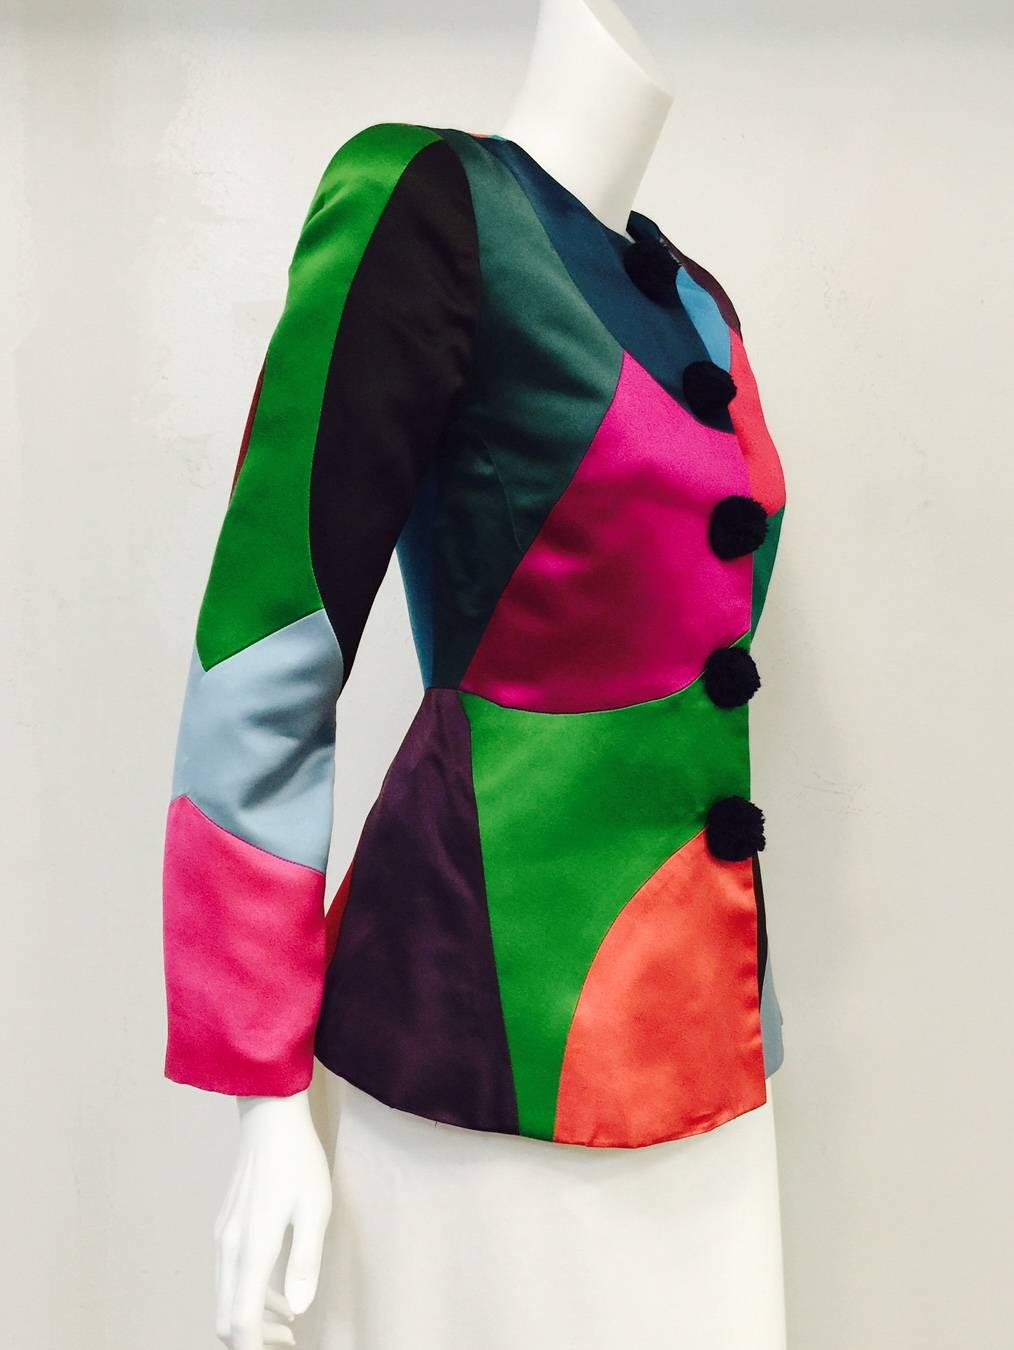 Make an unforgettable entrance in this Vintage Oscar de la Renta fitted Color Blocked Satin Jacket!  Clearly influenced by harlequin attire, collarless jacket is expertly crafted from ultra-luxurious satin "patches" in vibrant colors